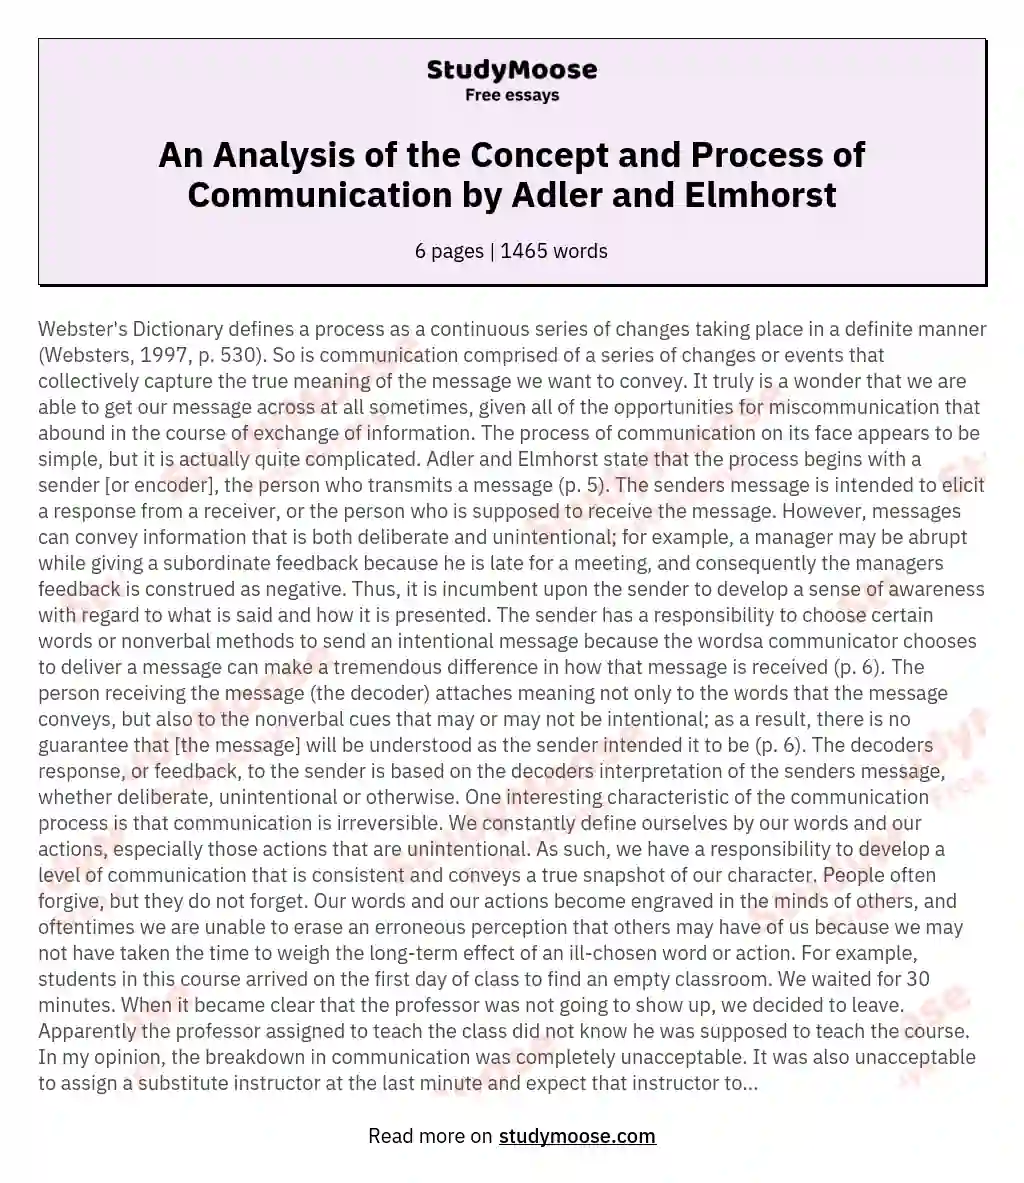 An Analysis of the Concept and Process of Communication by Adler and Elmhorst essay